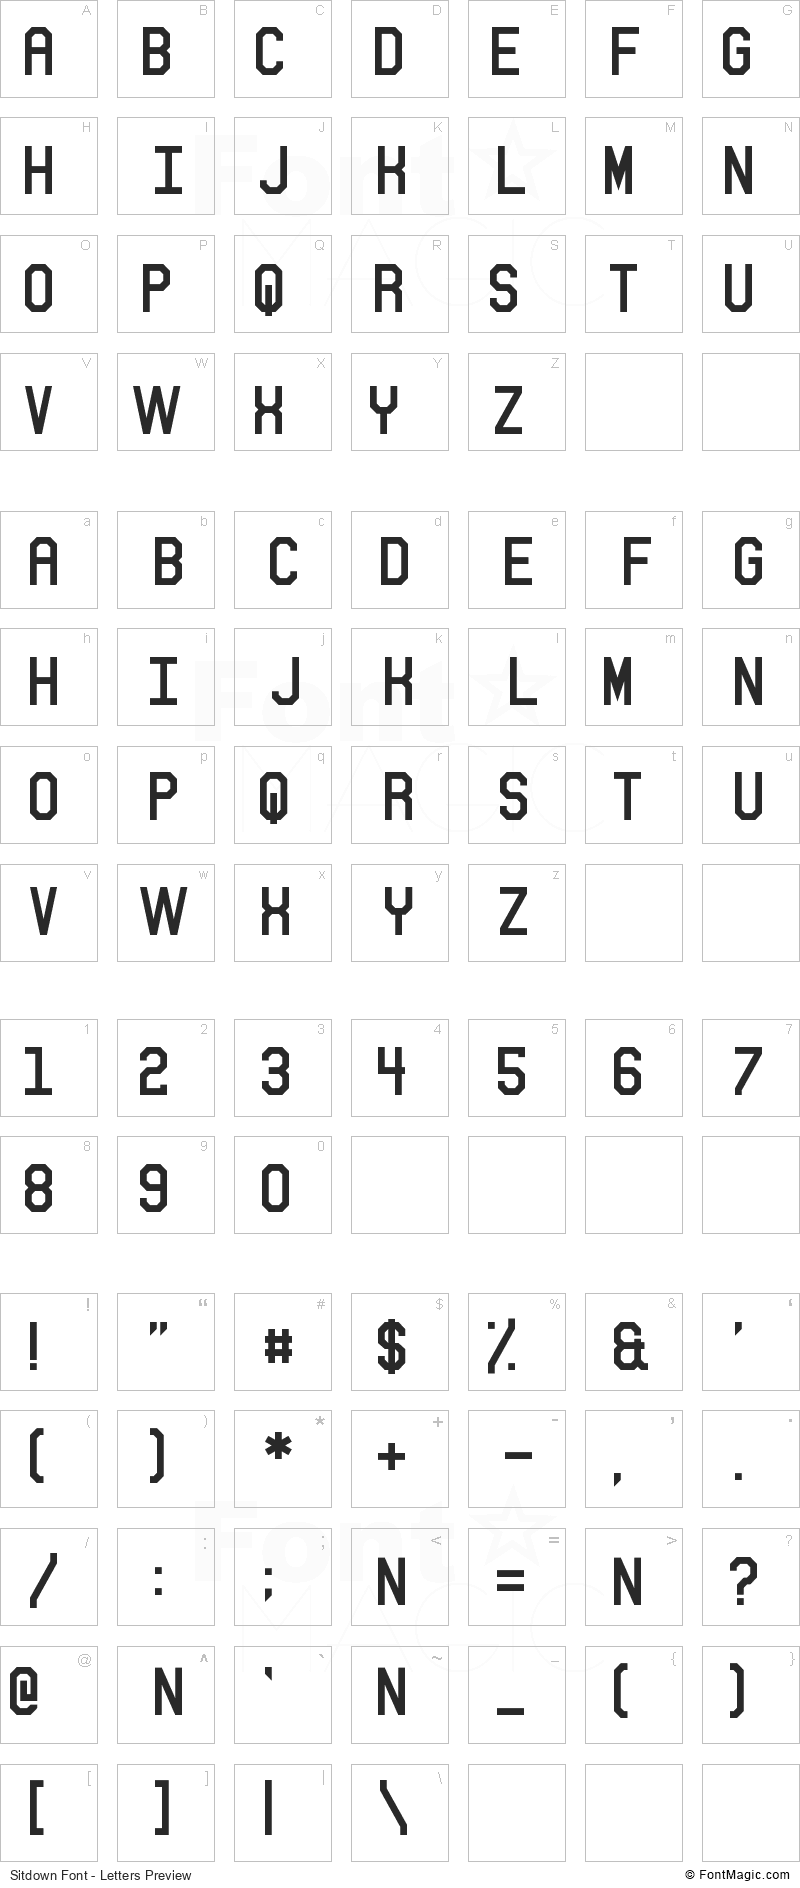 Sitdown Font - All Latters Preview Chart